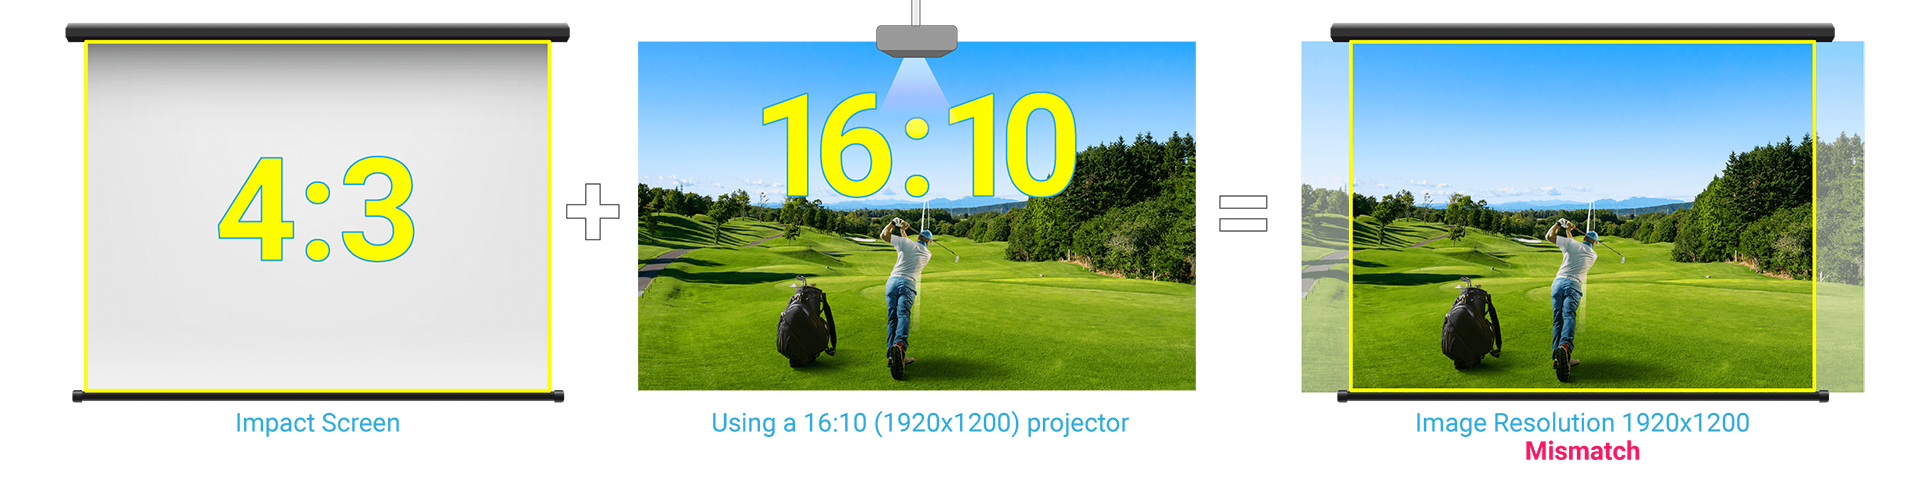 Use a projector of native resolution 1920x1200, the result will be a mismatch even though the image resolution remains 